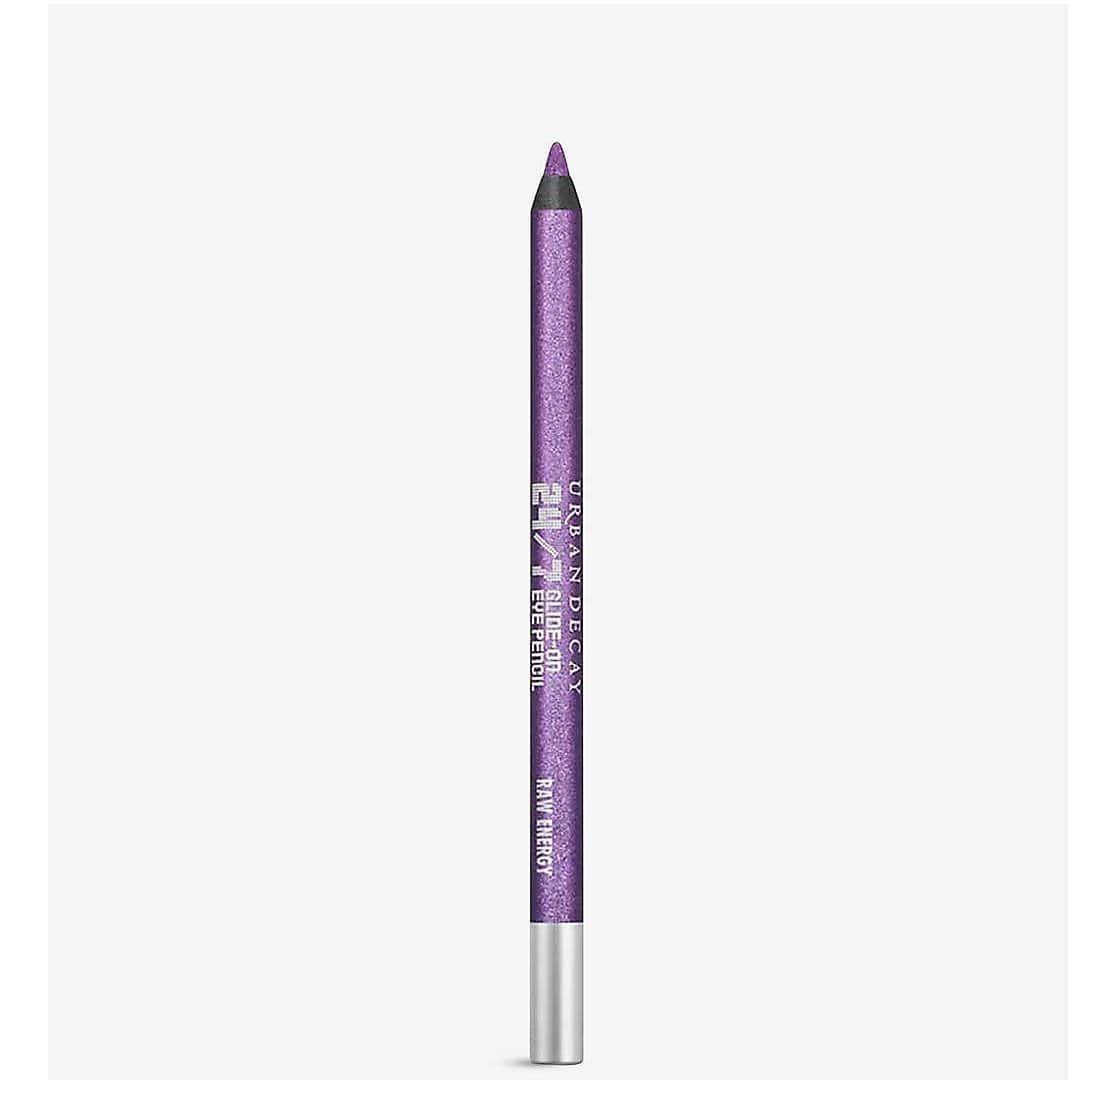 Urban Decay Beauty Urban Decay Stoned Vibes 24/7 Glide-On Eye Pencil